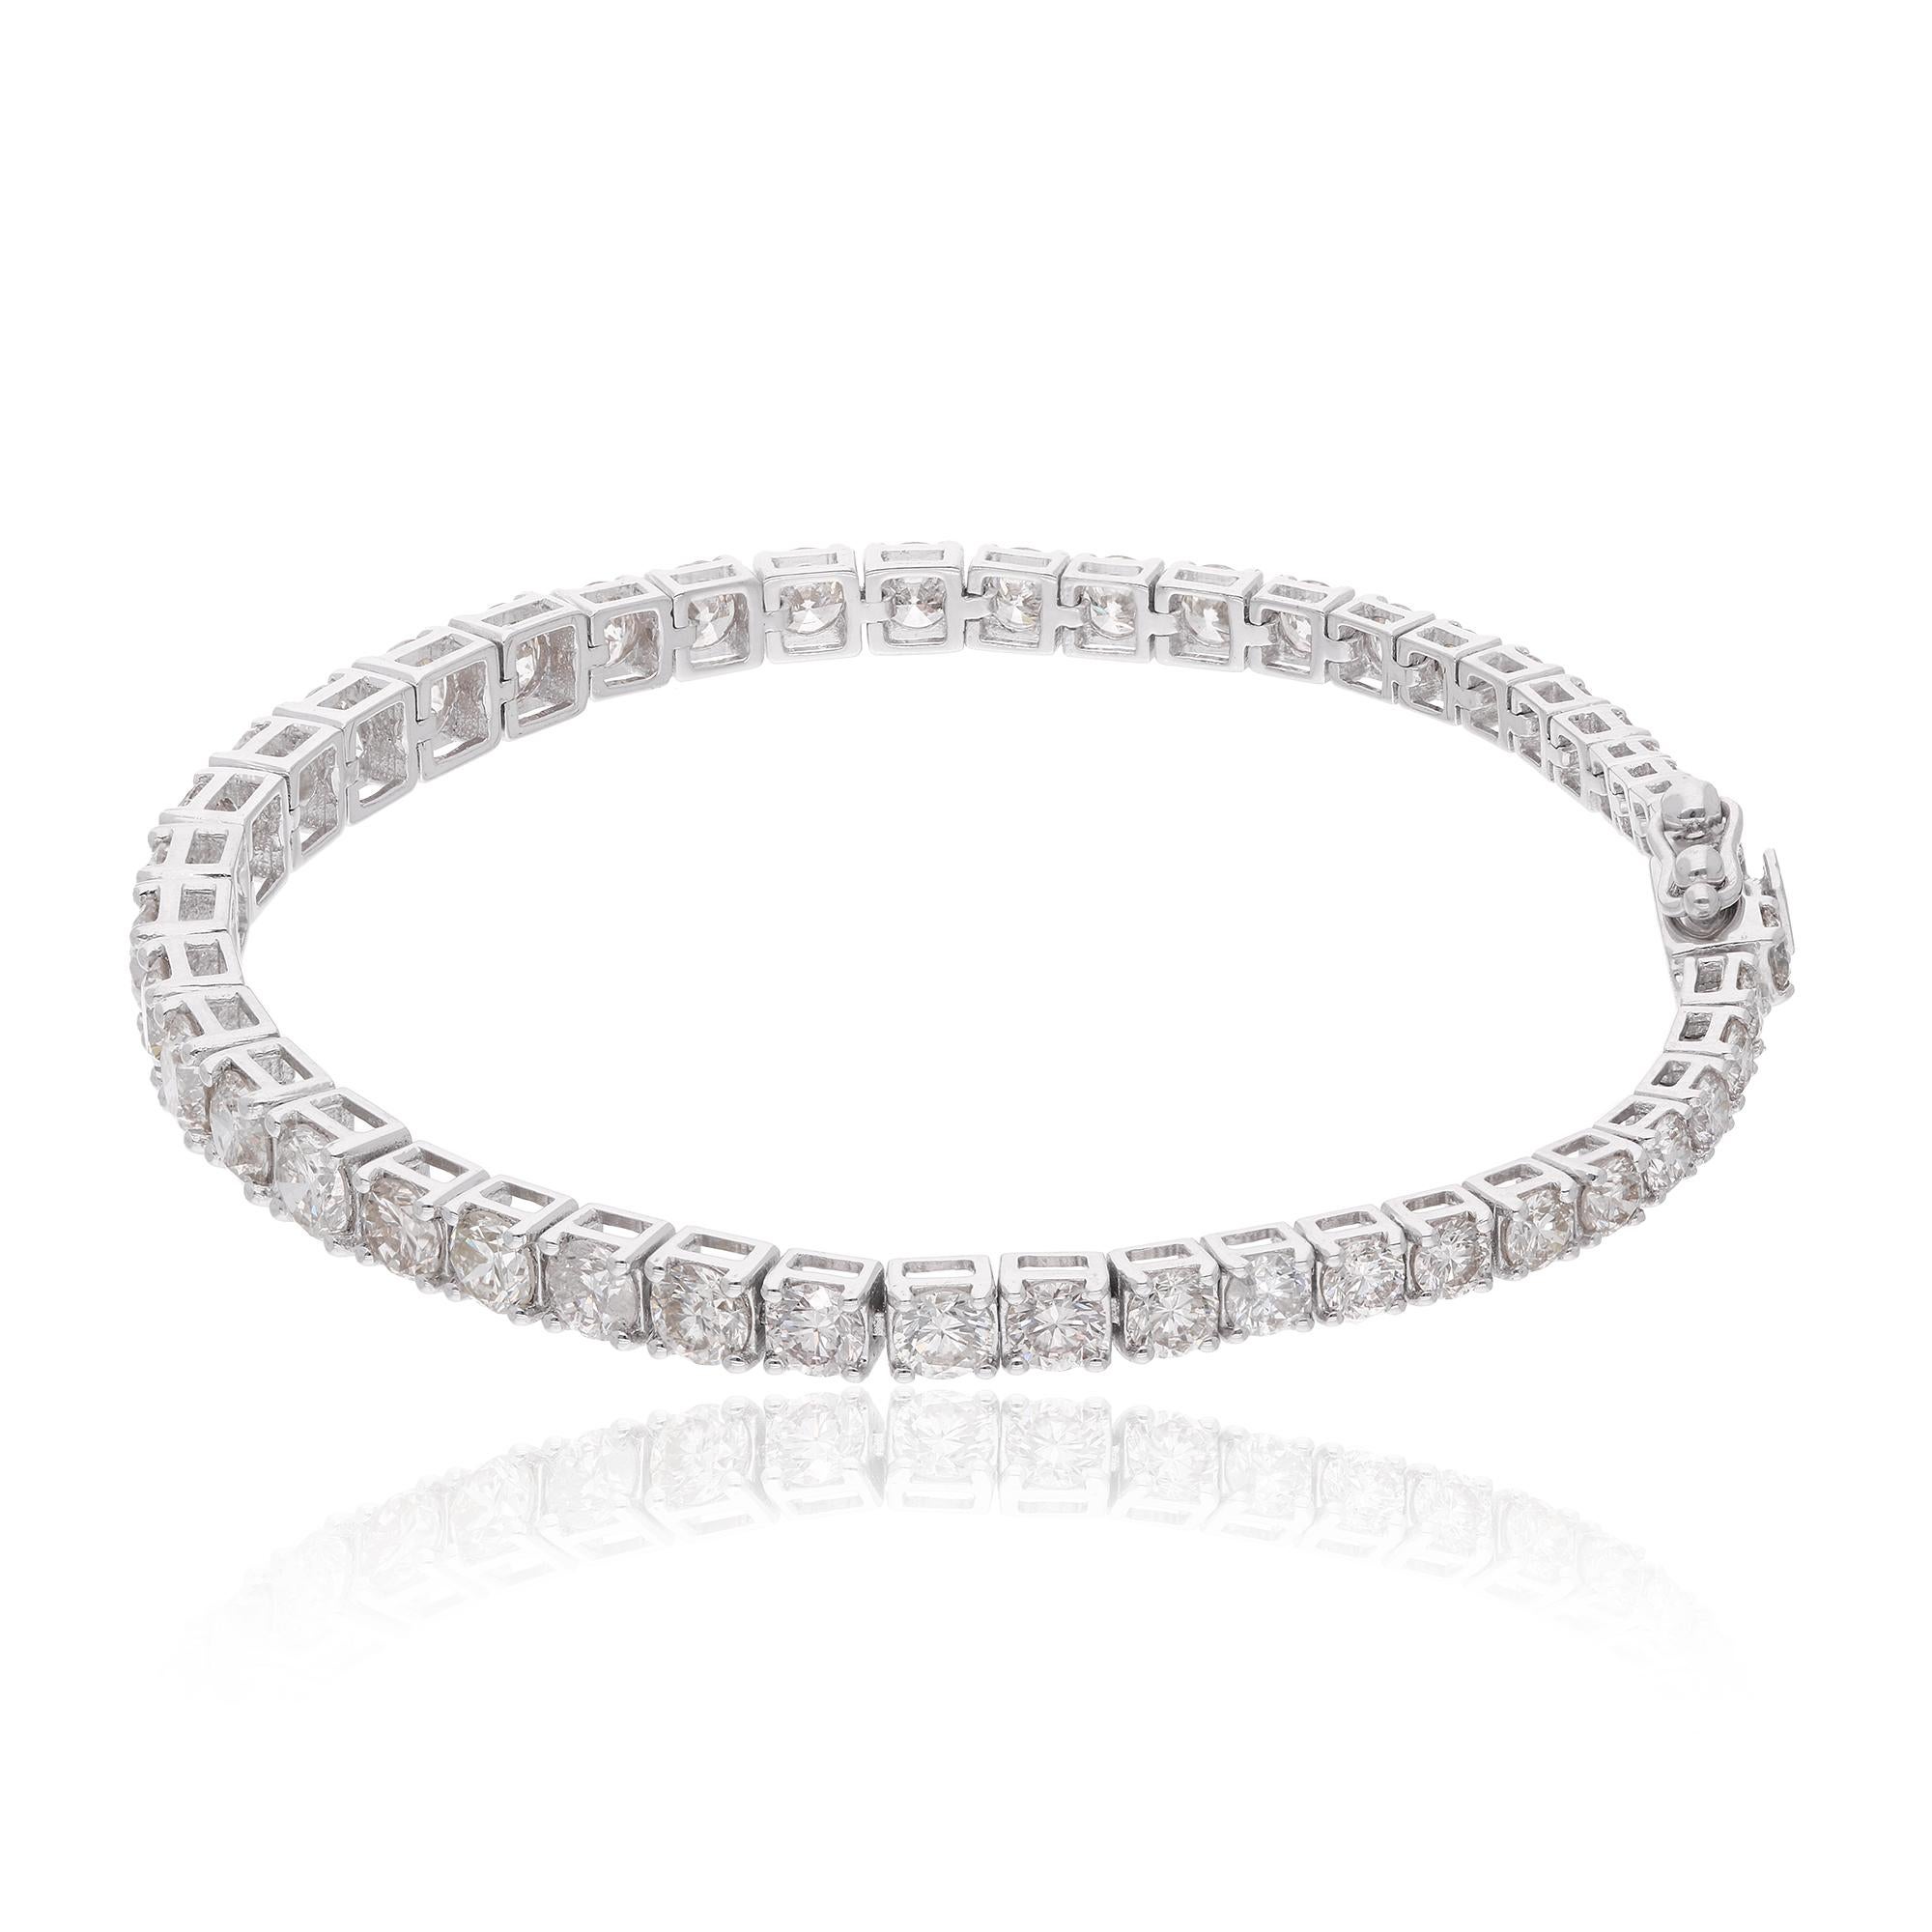 This stunning Diamond Tennis Bracelet is a luxurious and timeless accessory that will add a touch of elegance to any outfit.The bracelet features a continuous row of sparkling round diamonds that are securely prong-set in a classic four-prong